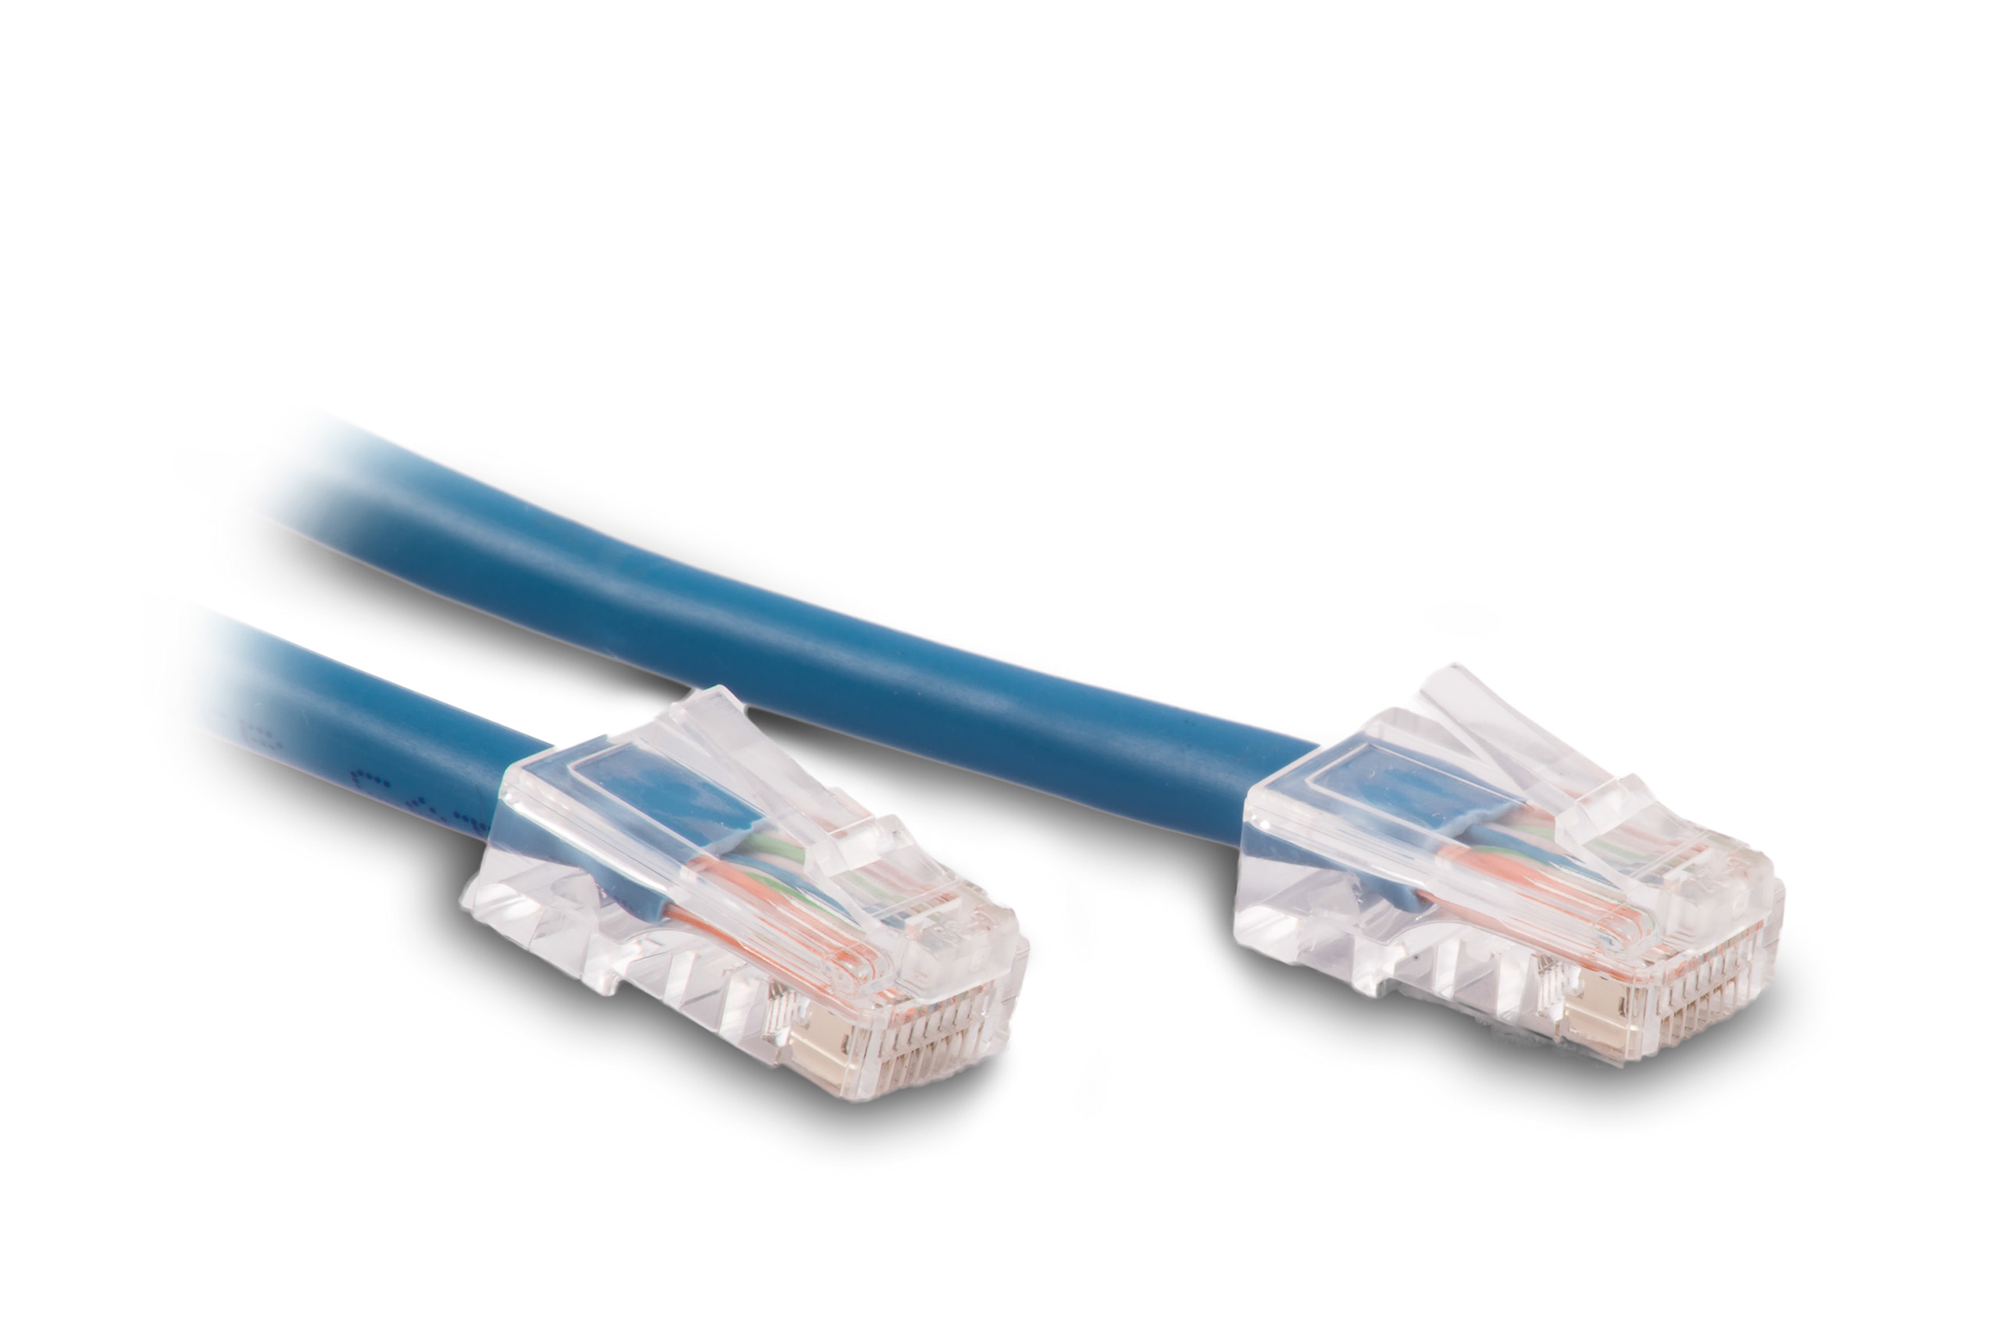 CAT6 Patch Cables - Choose your length and color